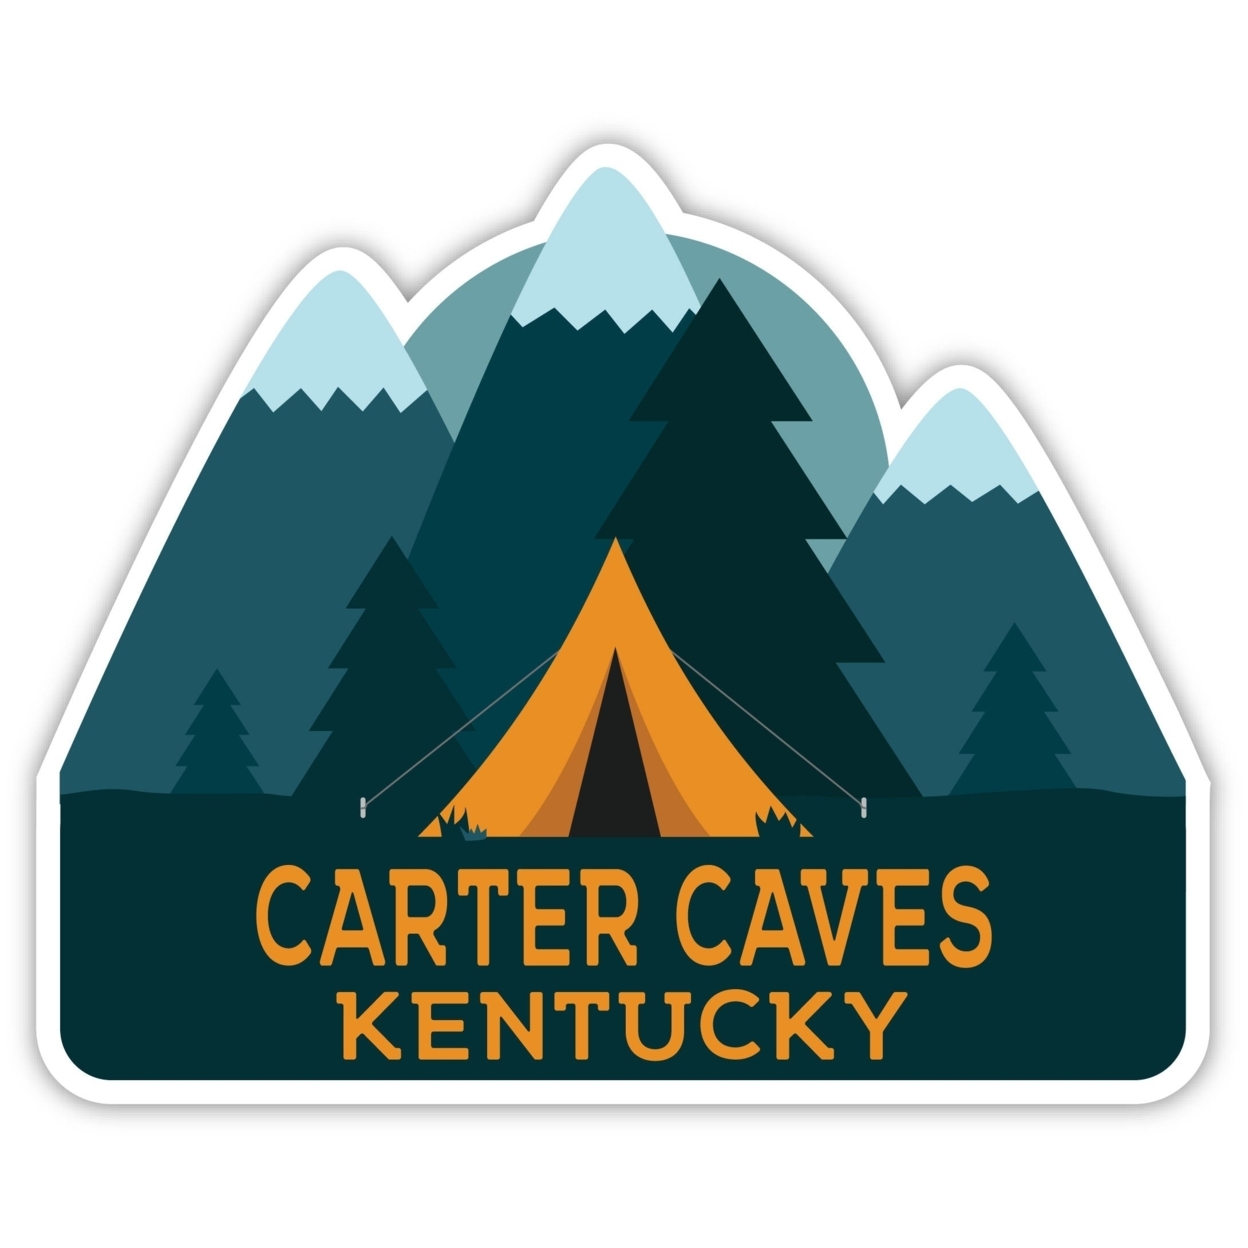 Carter Caves Kentucky Souvenir Decorative Stickers (Choose Theme And Size) - 4-Pack, 2-Inch, Tent